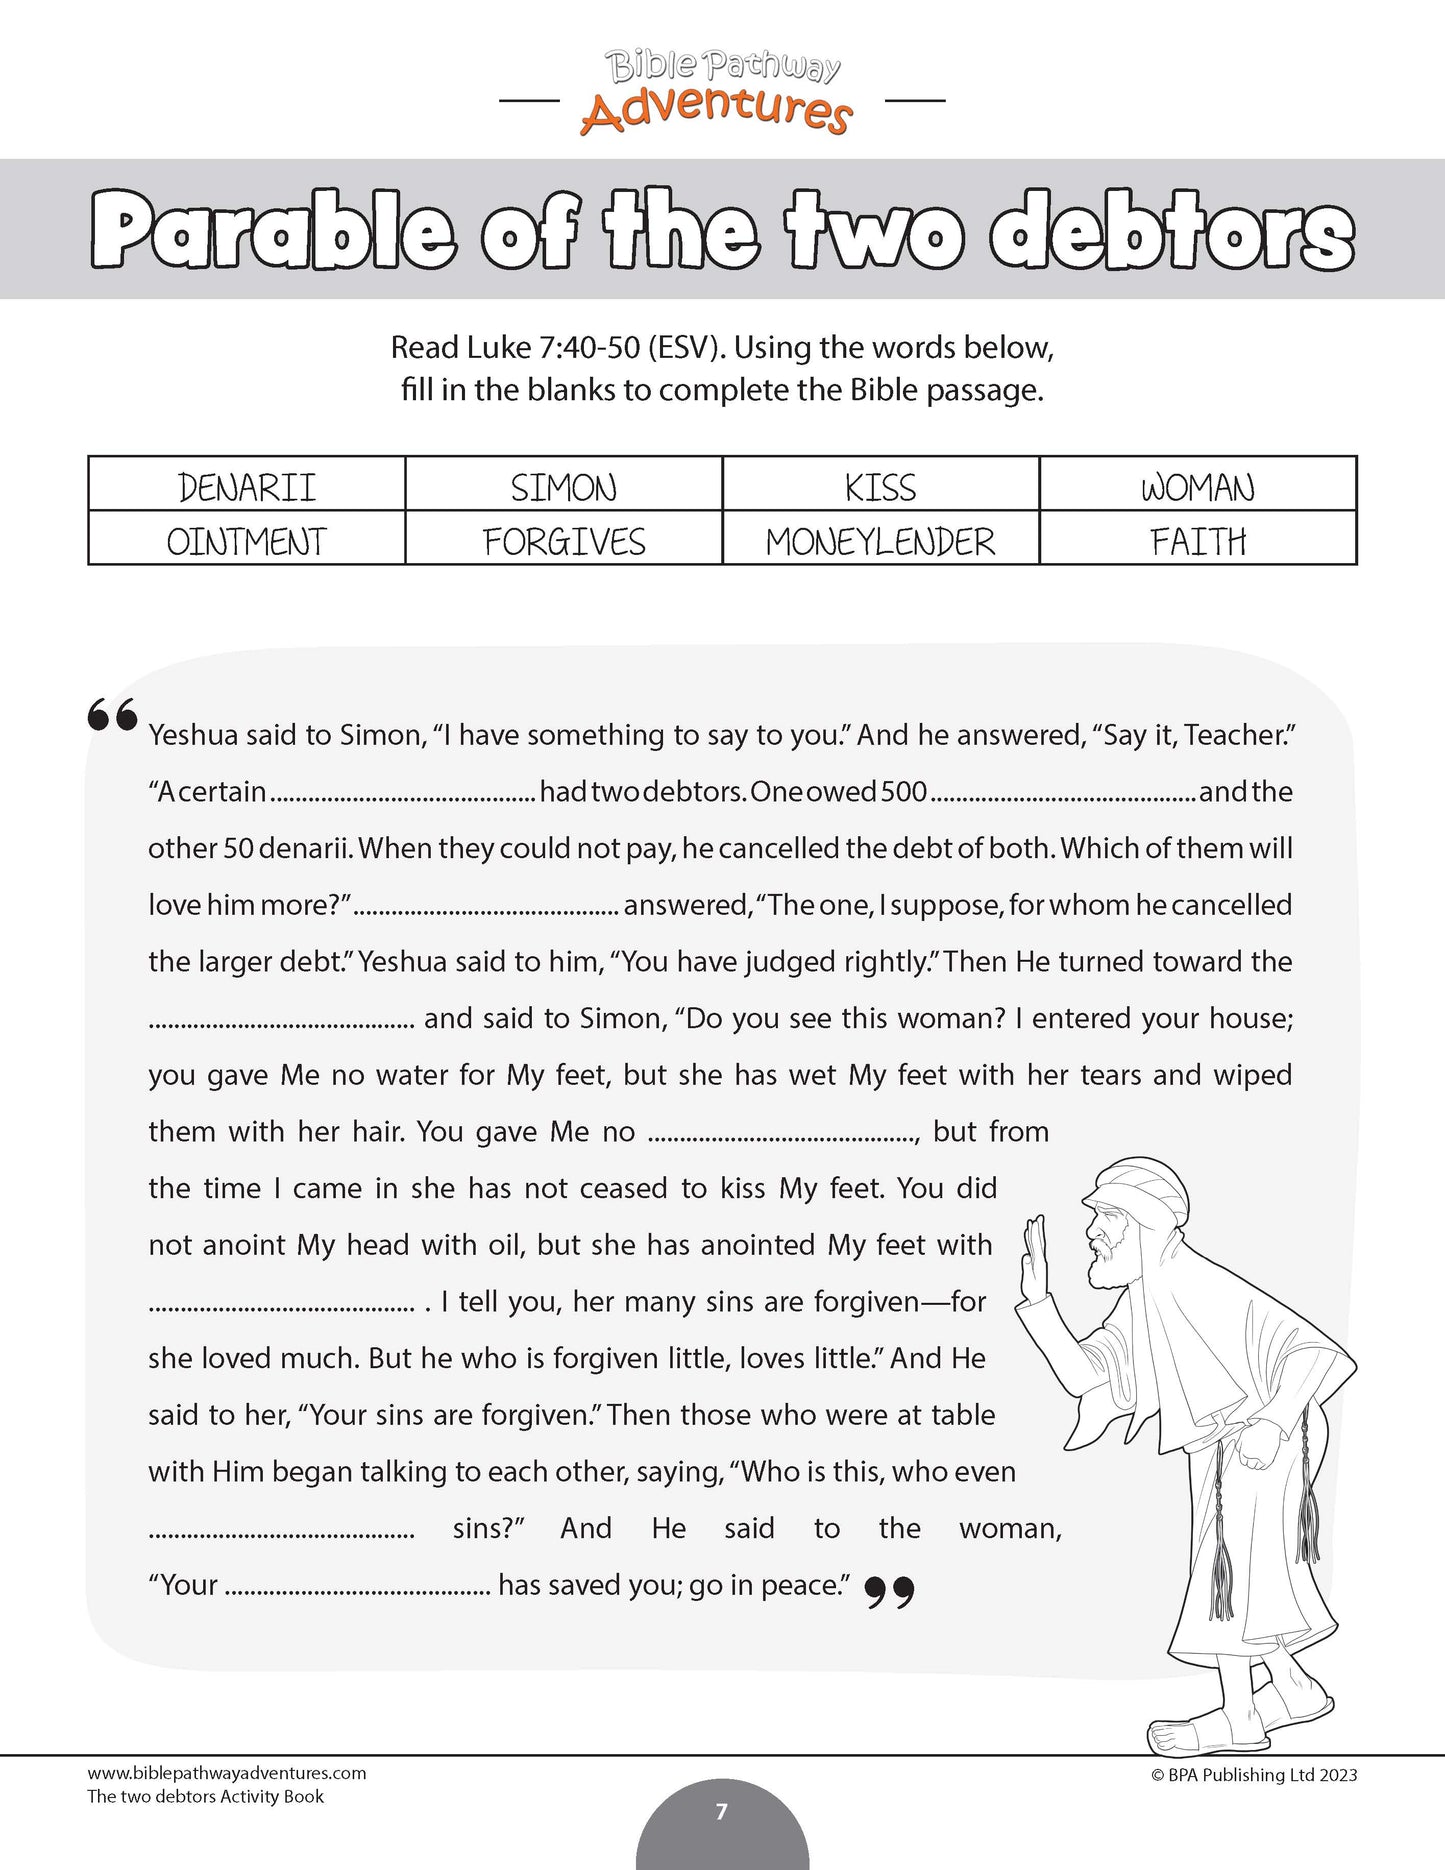 Parable of the Two Debtors Activity Book